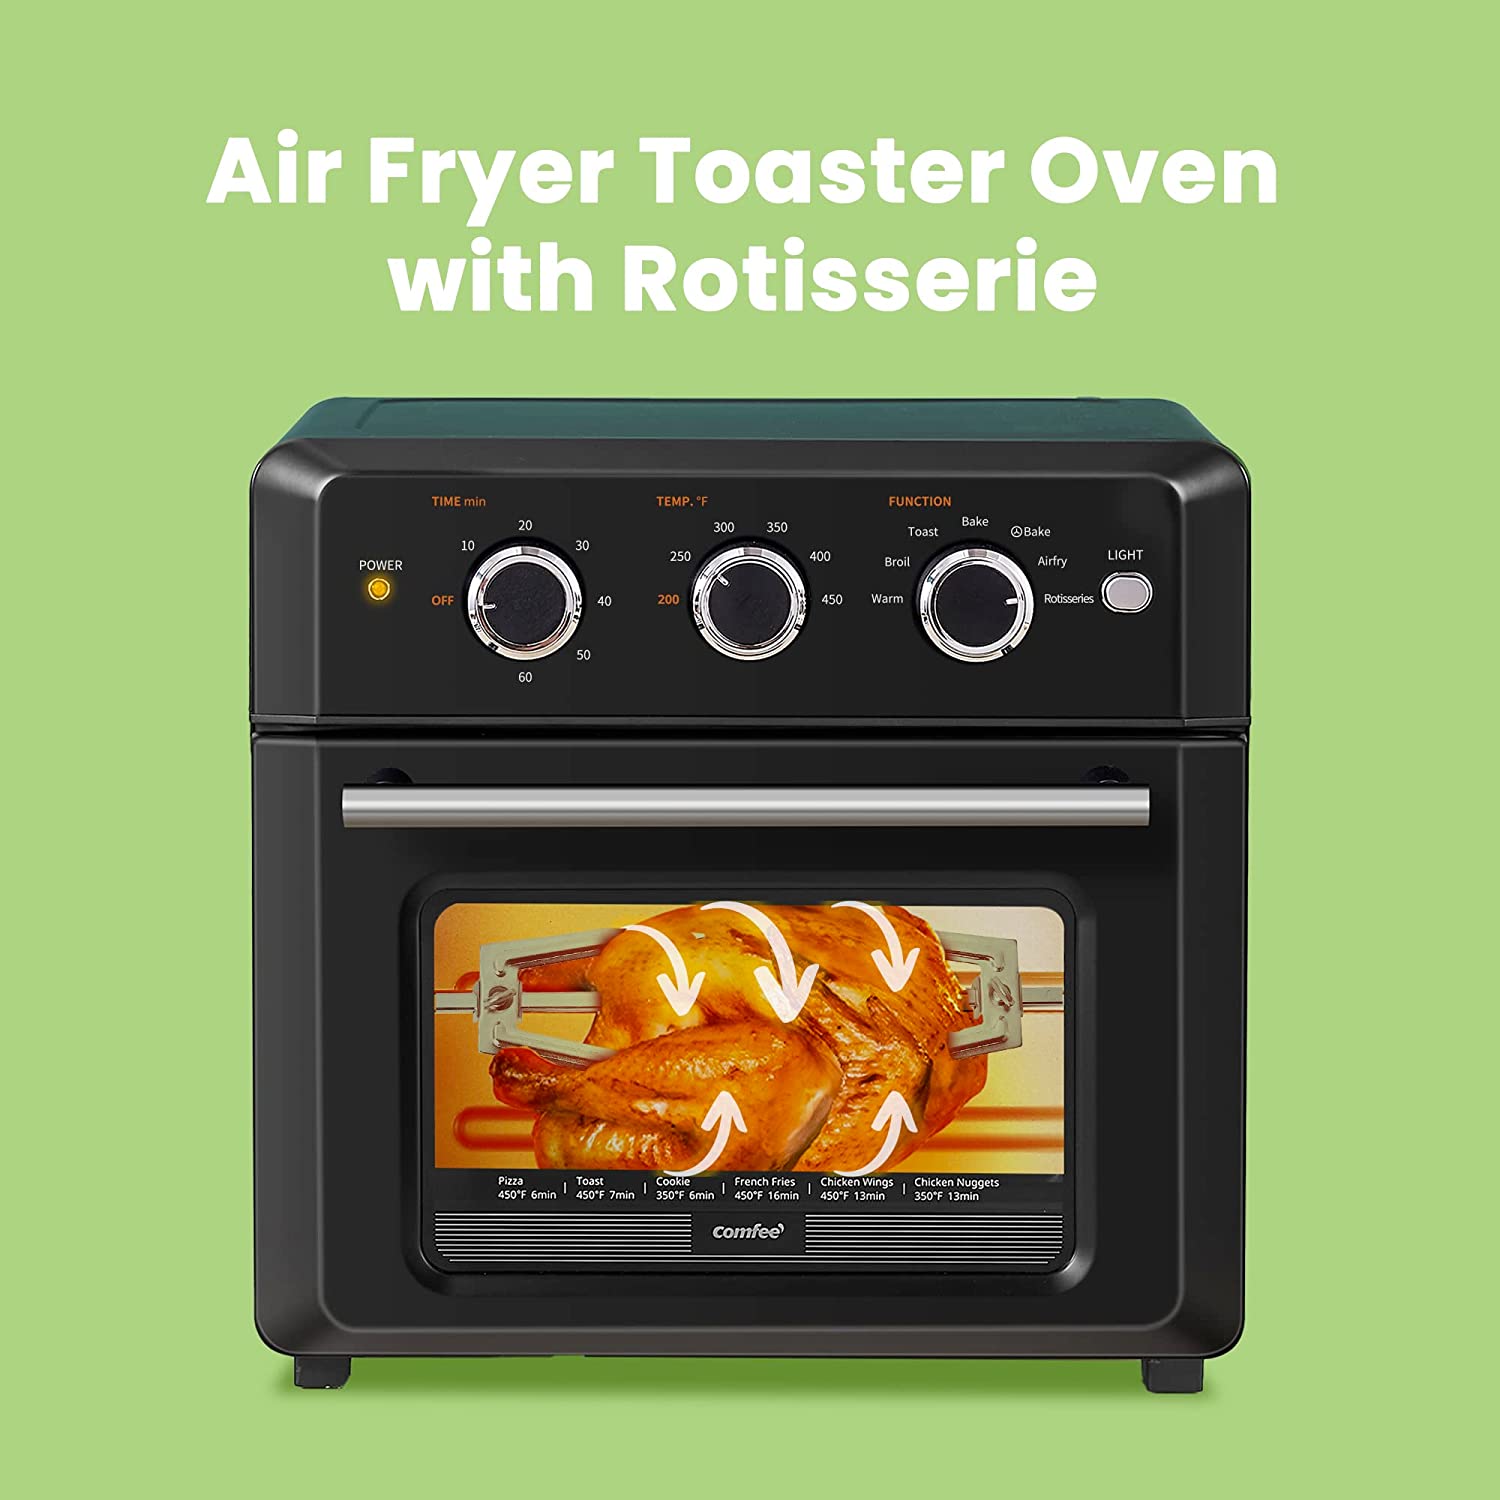 7-In-1 Multifunction Toaster Oven with Warm Broil Toast Bake Air Fryer  Function, 1 Unit - Kroger